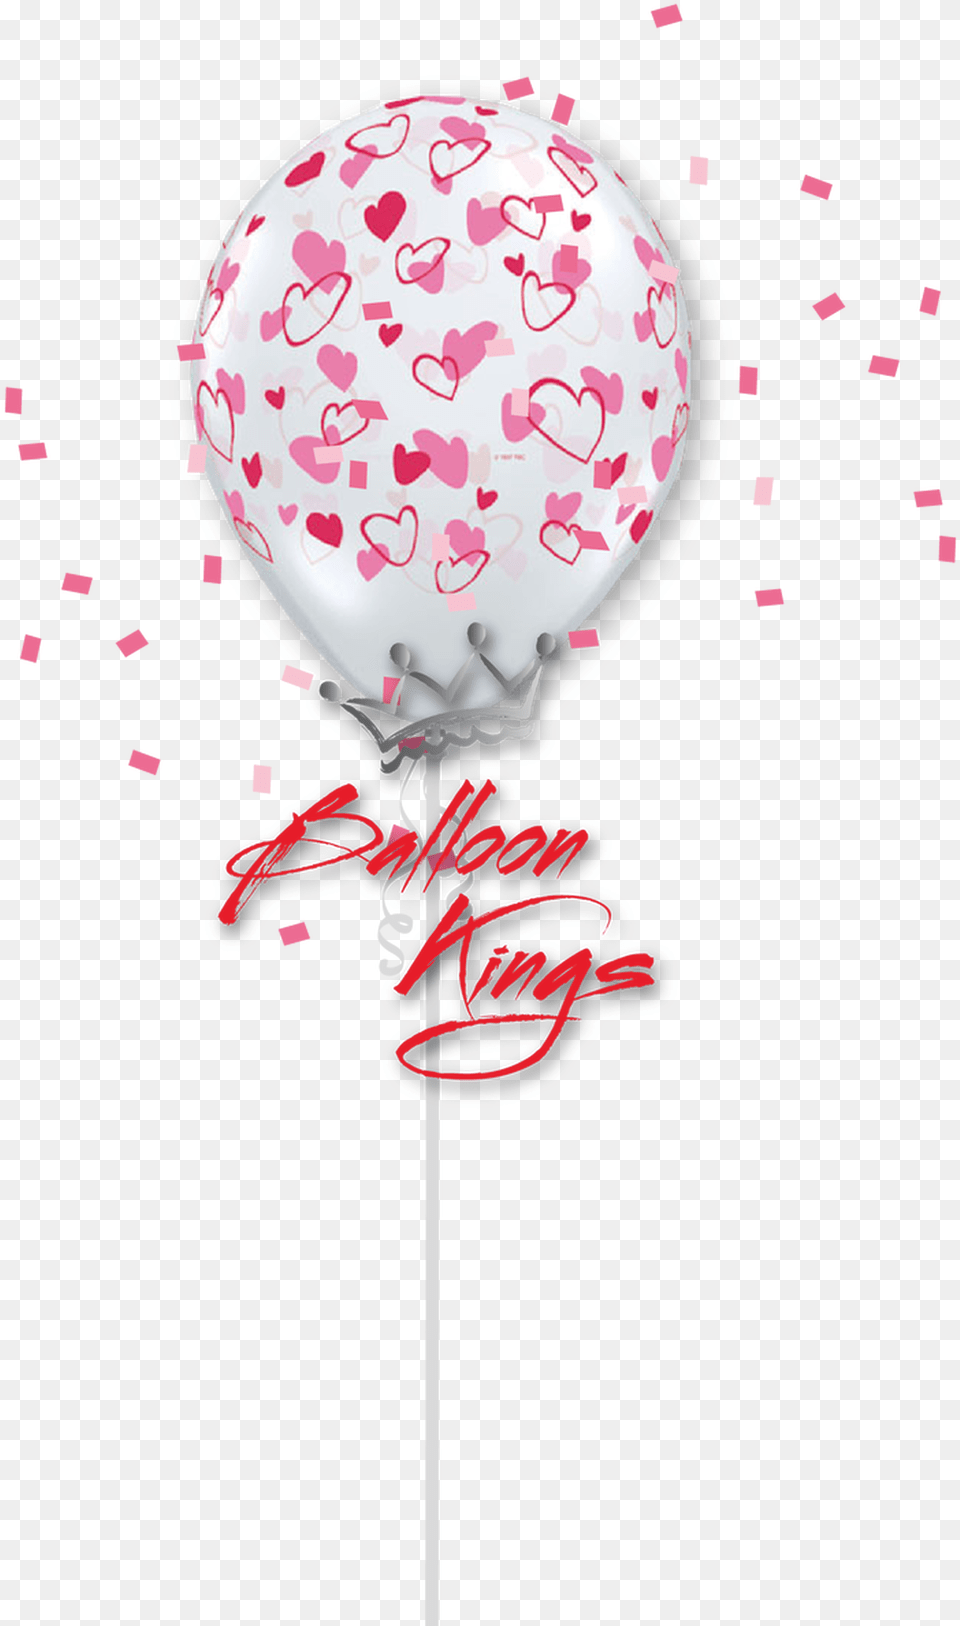 Floating Hearts 11in Latex Clear Red And Pink Hearts Illustration, Balloon, Food, Sweets, Candy Png